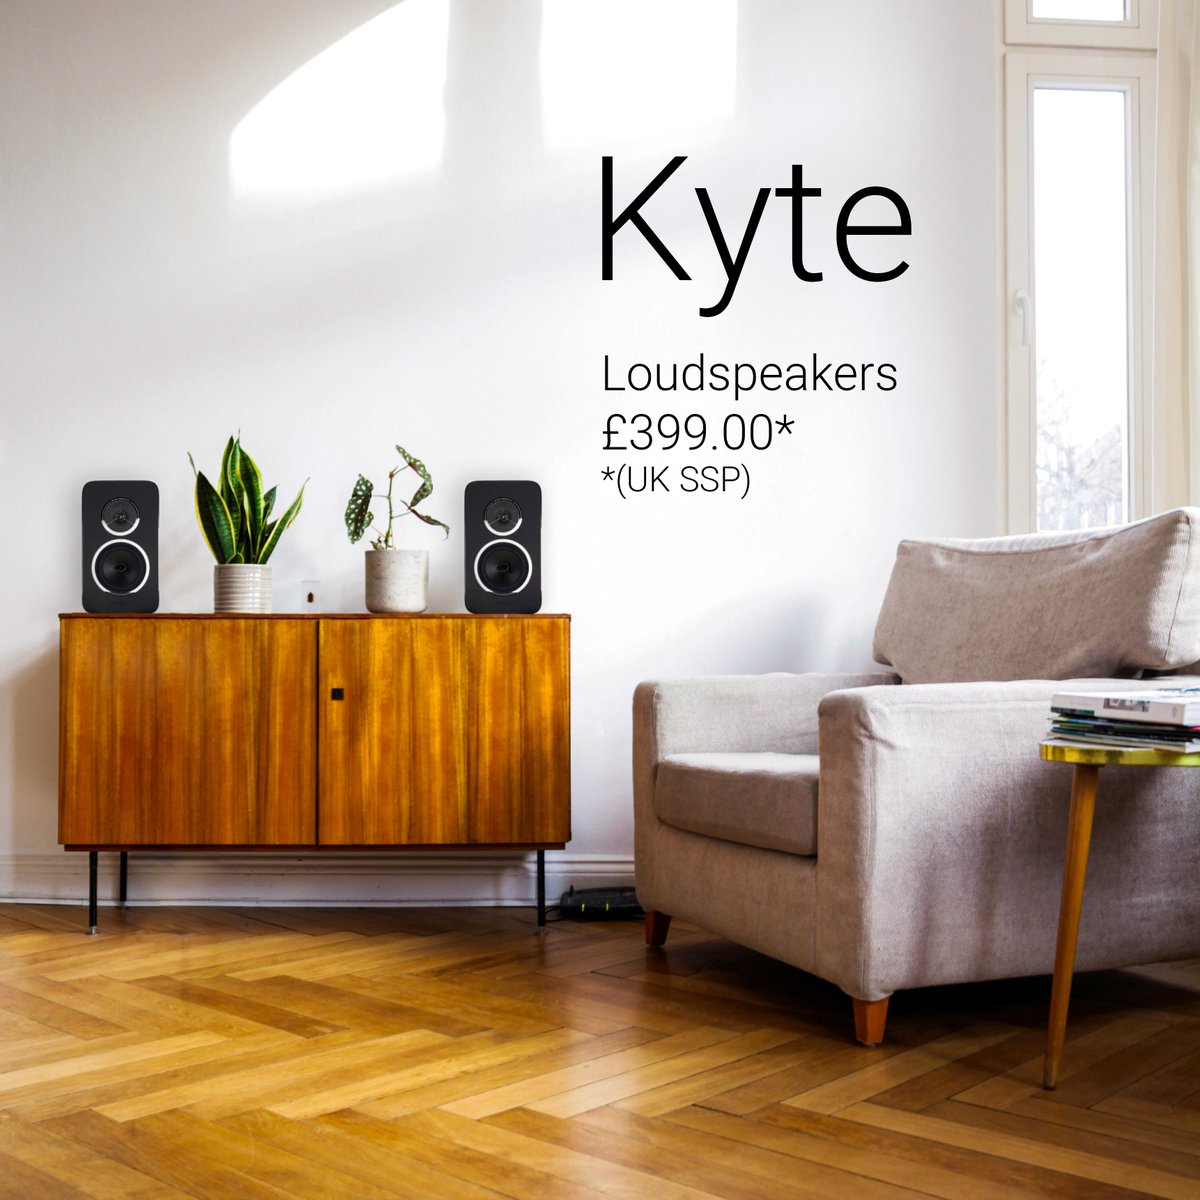 The Rega Kyte loudspeakers (£399.00 UK SSP) are meticulously hand-assembled in-house using our unique design phenolic resin cabinet. The Kytes also internally feature ceramic plates and carefully engineered cross bracing developed to make the cabinet extremely stiff. This